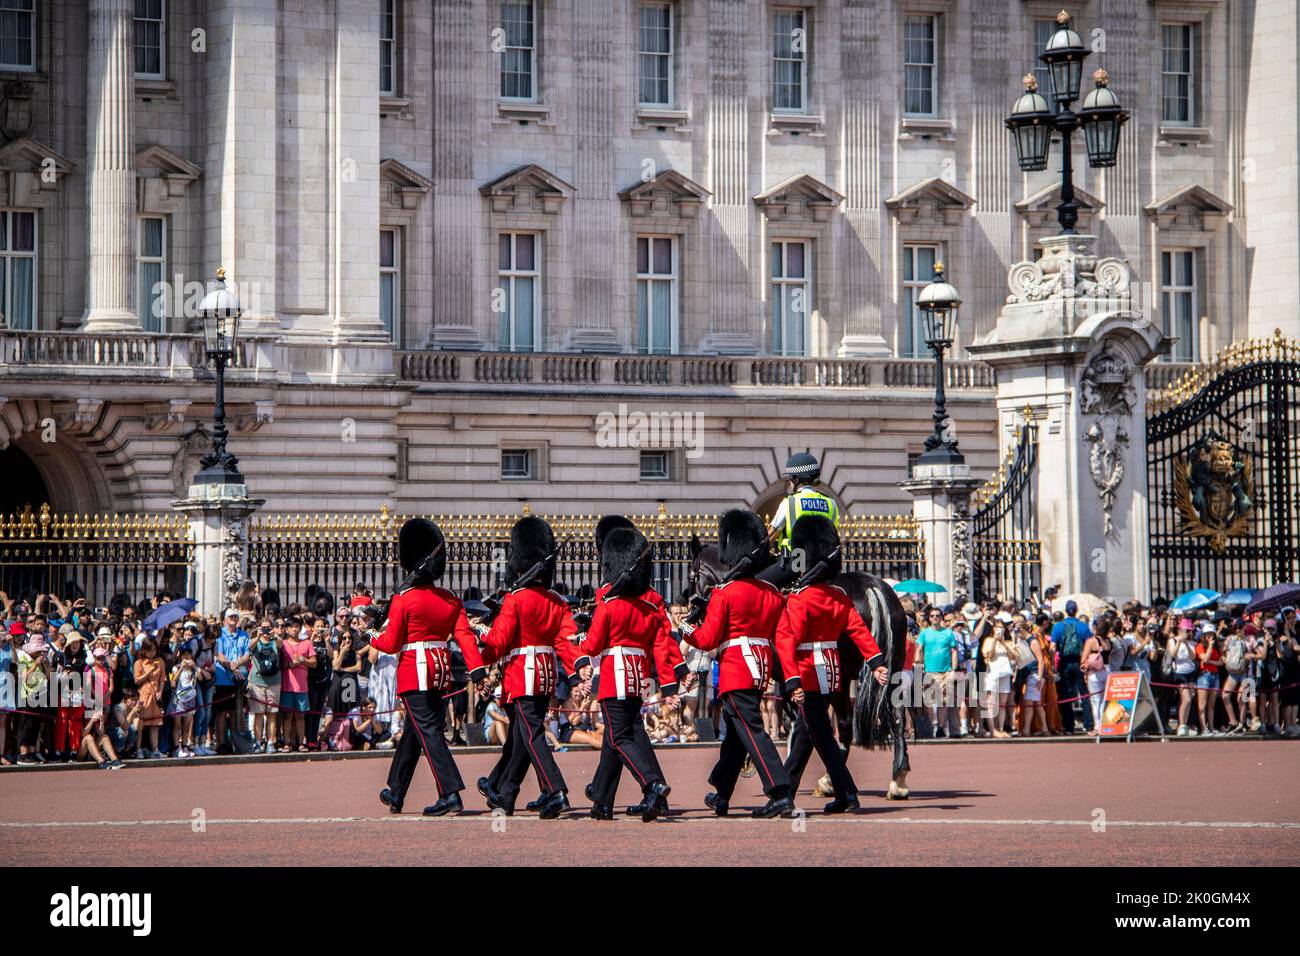 2019 07 24 London UK The Changing of the Guards in front of Buckingham palace with a crowd of tourists watching - selective focus Stock Photo